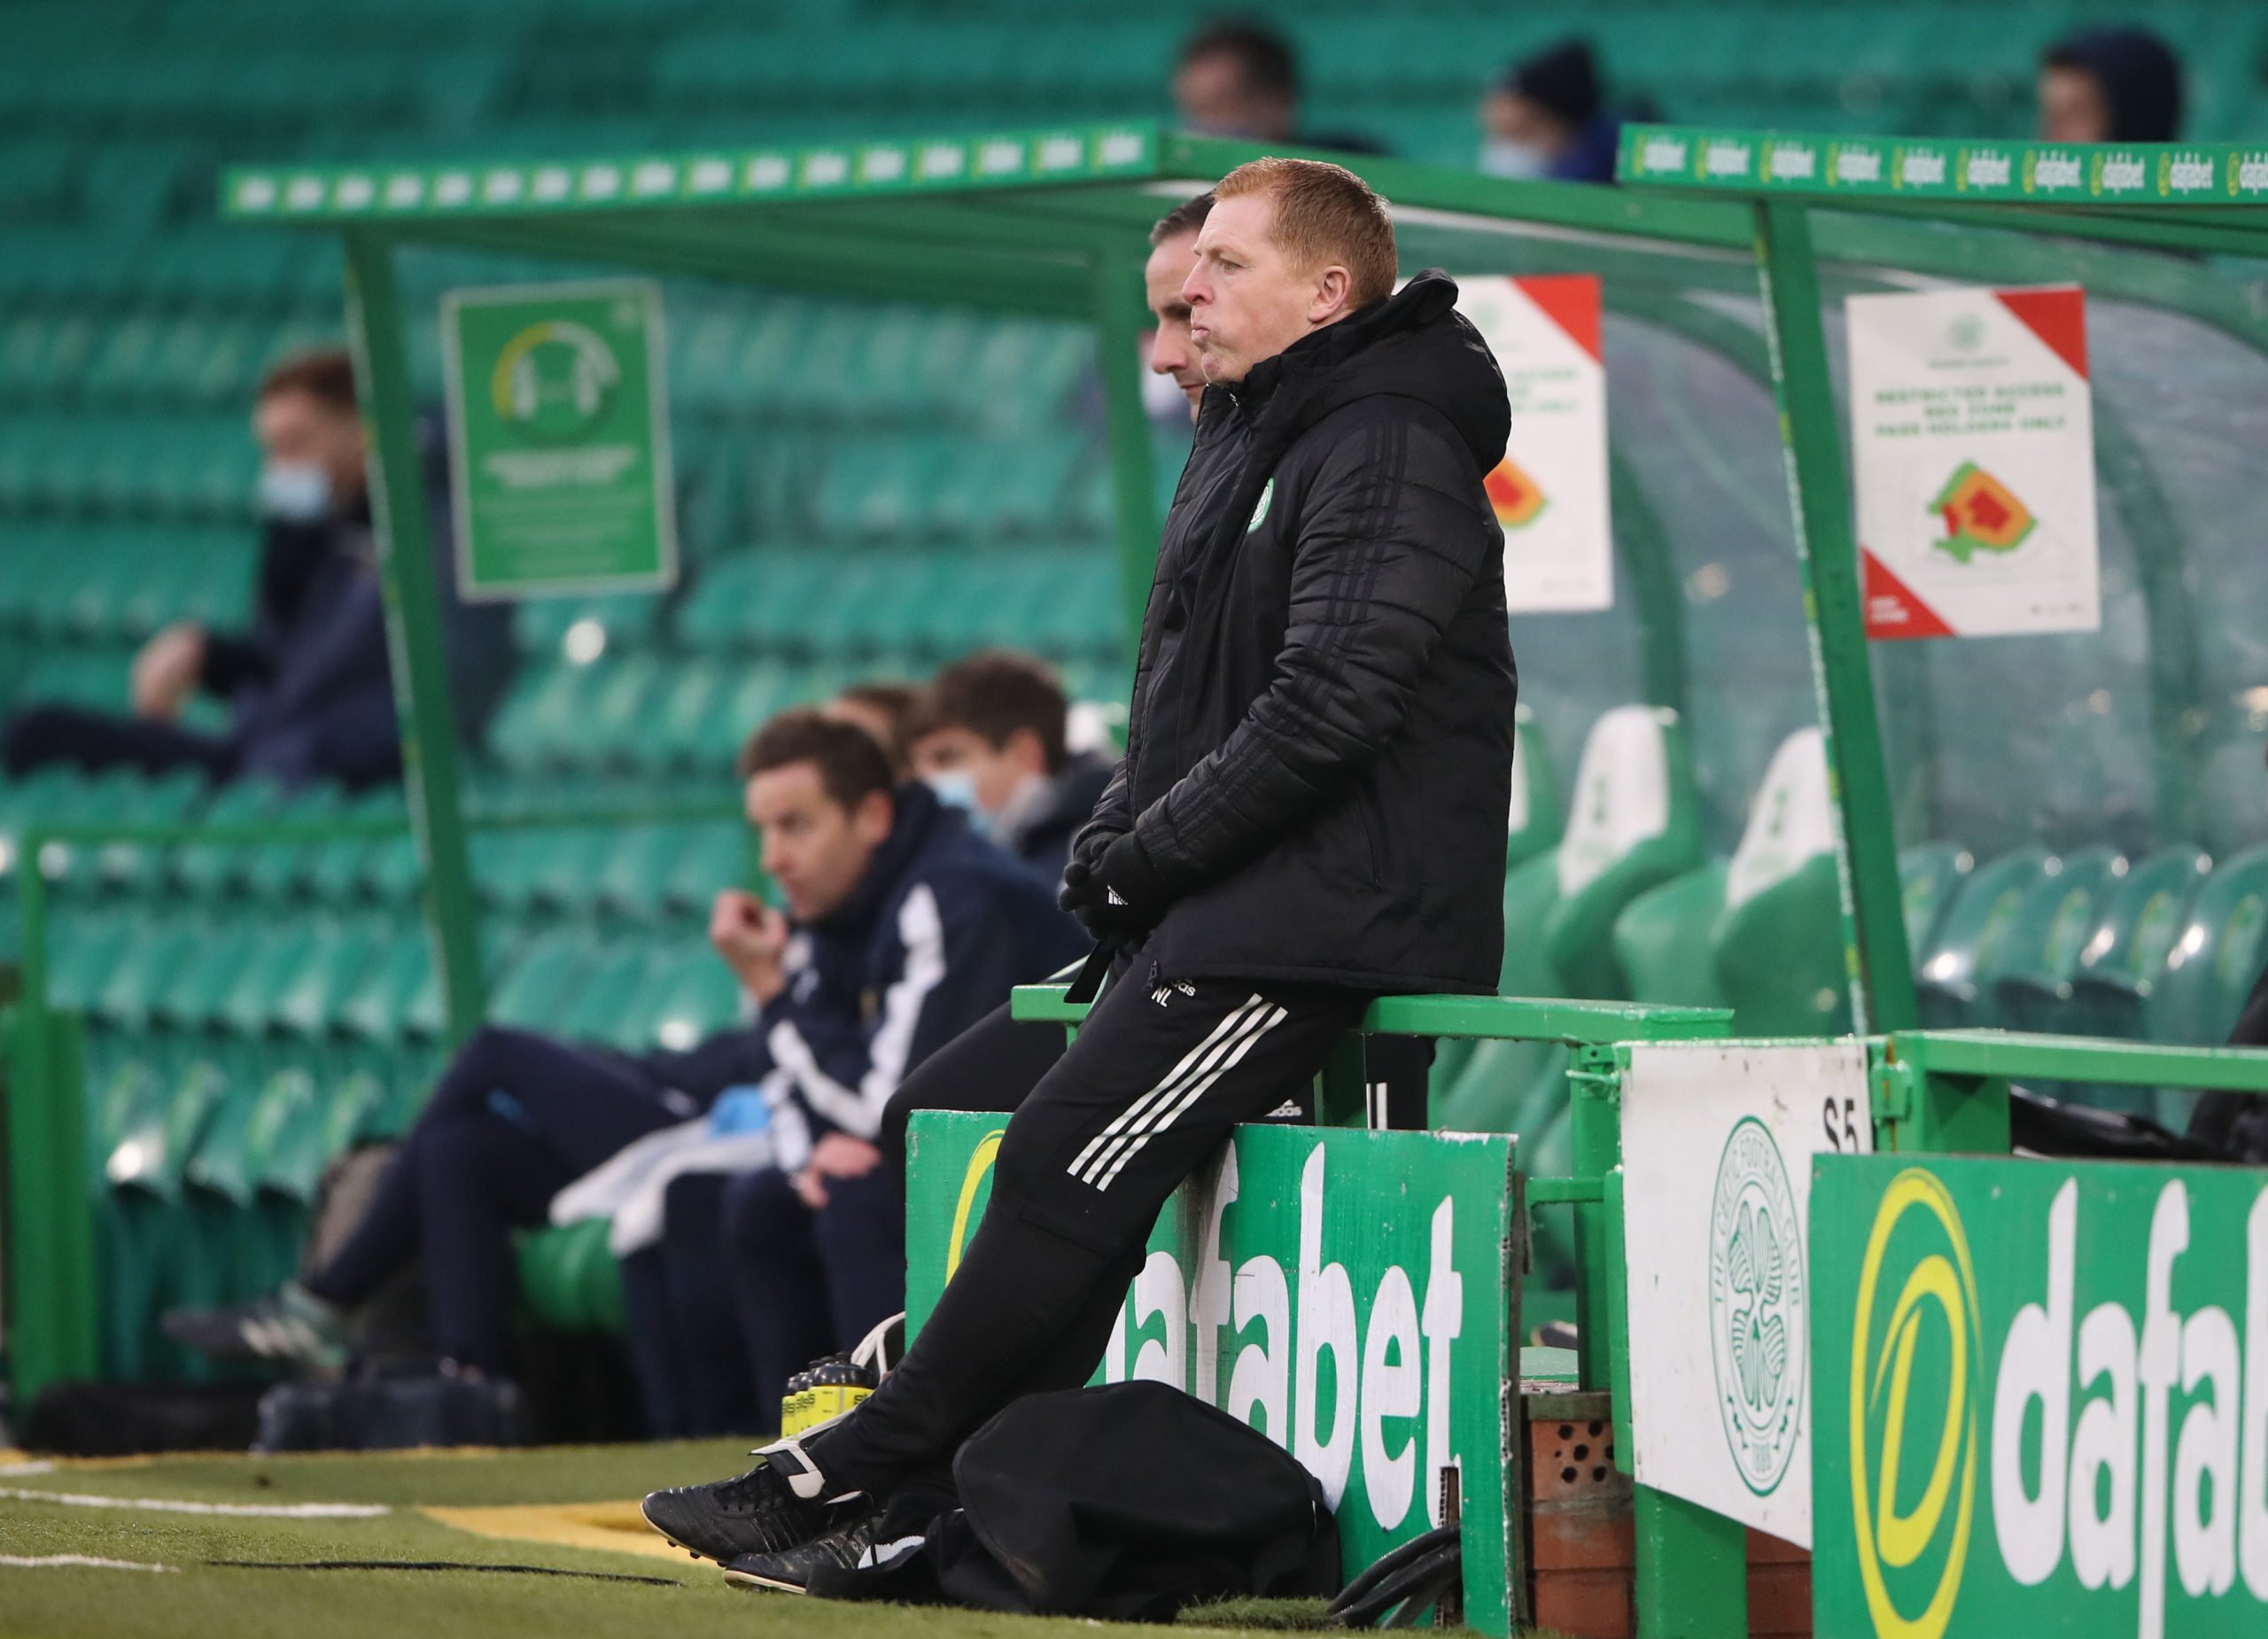 Neil Lennon's comments on Celtic player fitness tonight are astonishing